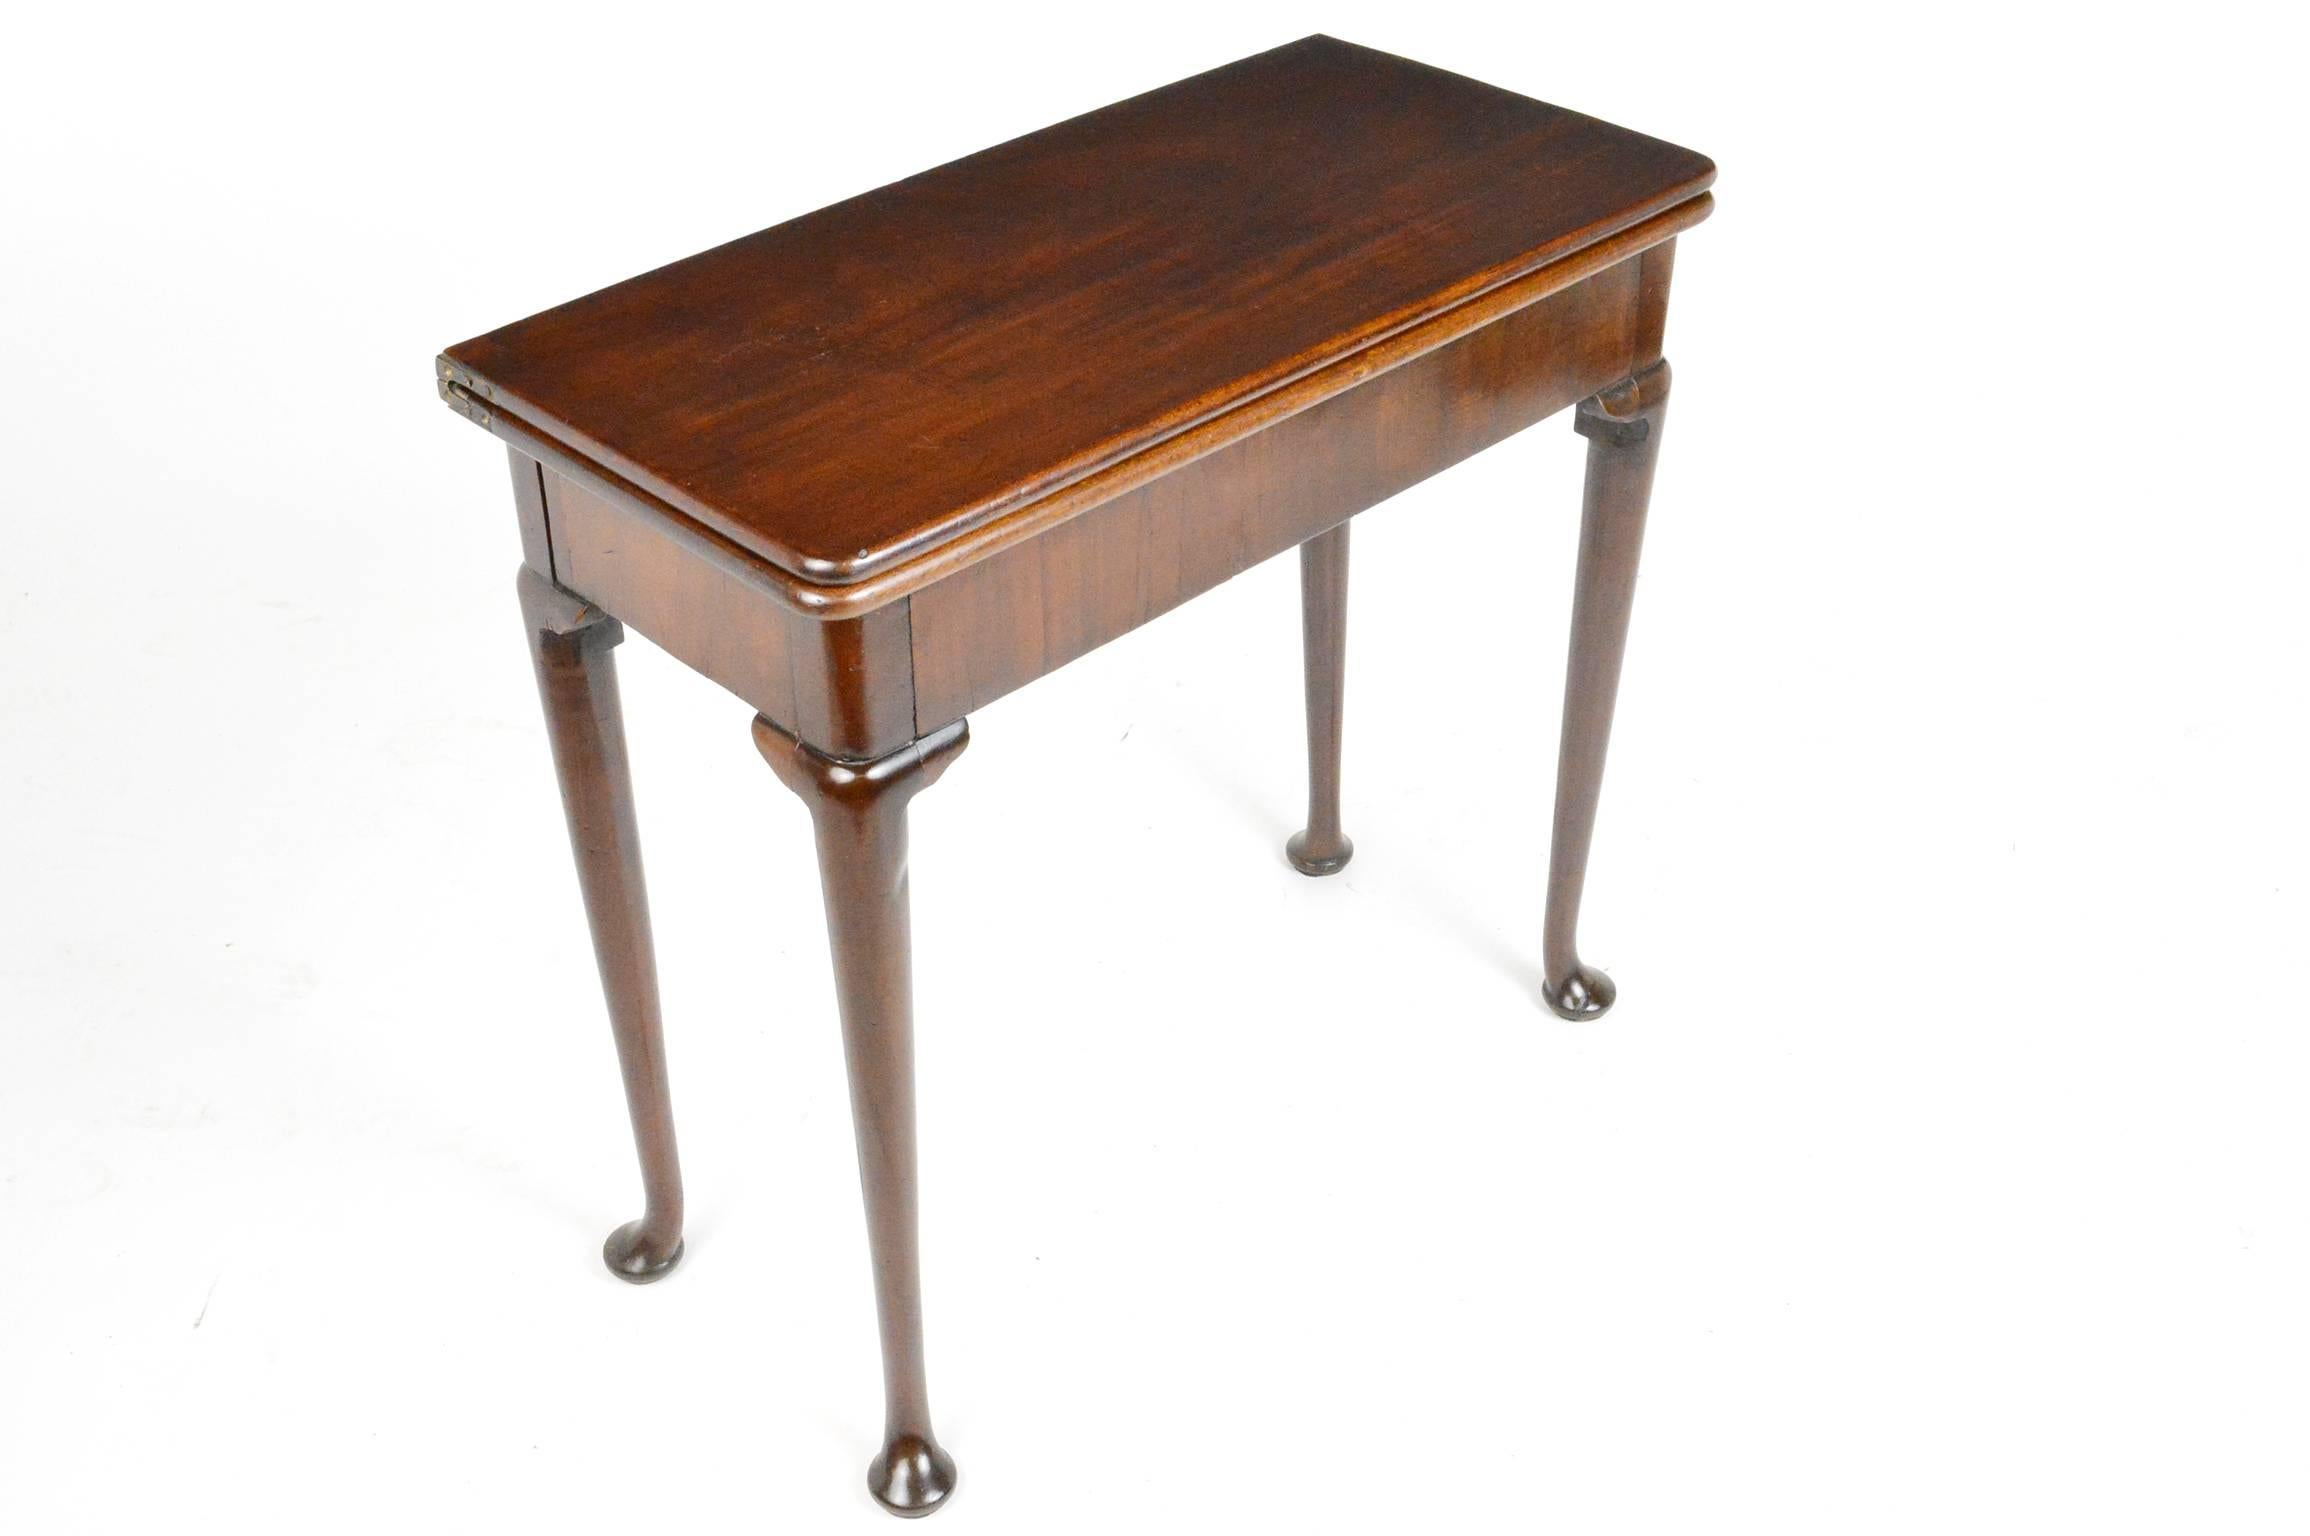 18th century English mahogany game table with cabriole legs having a warm patina to finish and a beautiful grain.